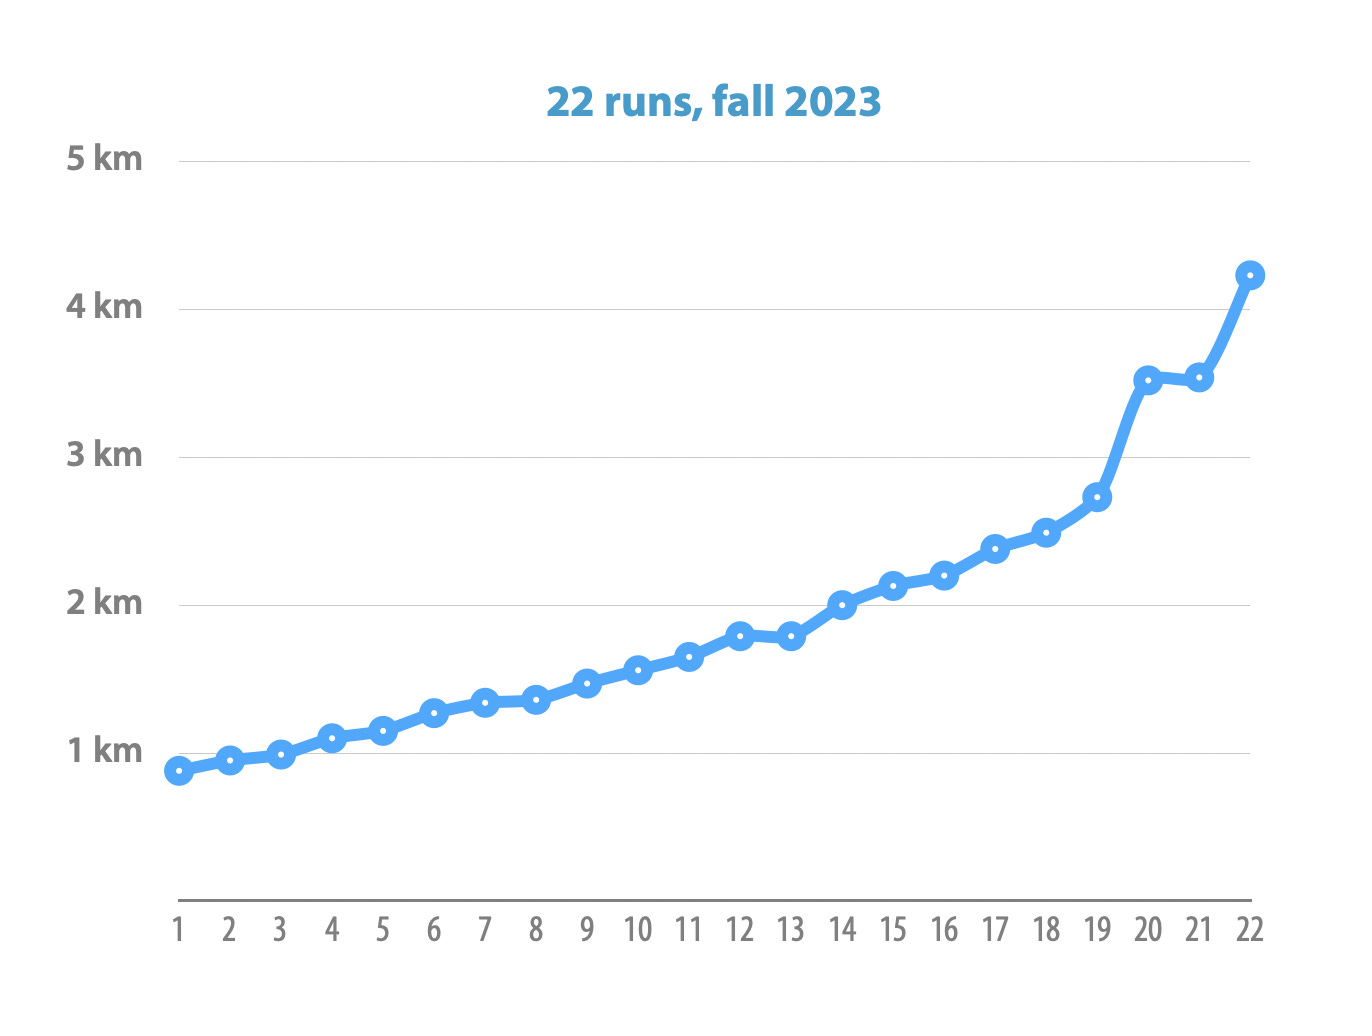 Line graph titled '22 runs, fall 2023' showing a progressive increase in distance run over 22 sessions. The x-axis is labeled with session numbers 1 through 22, and the y-axis is marked with distances from 1 km to 5 km. The line graph starts at just over 1 km and ends close to 5 km, with each dot representing an individual run.  Overall the graph makes an impression of very slow progression until the last four runs, where the distance increases quite a bit compare to previously.